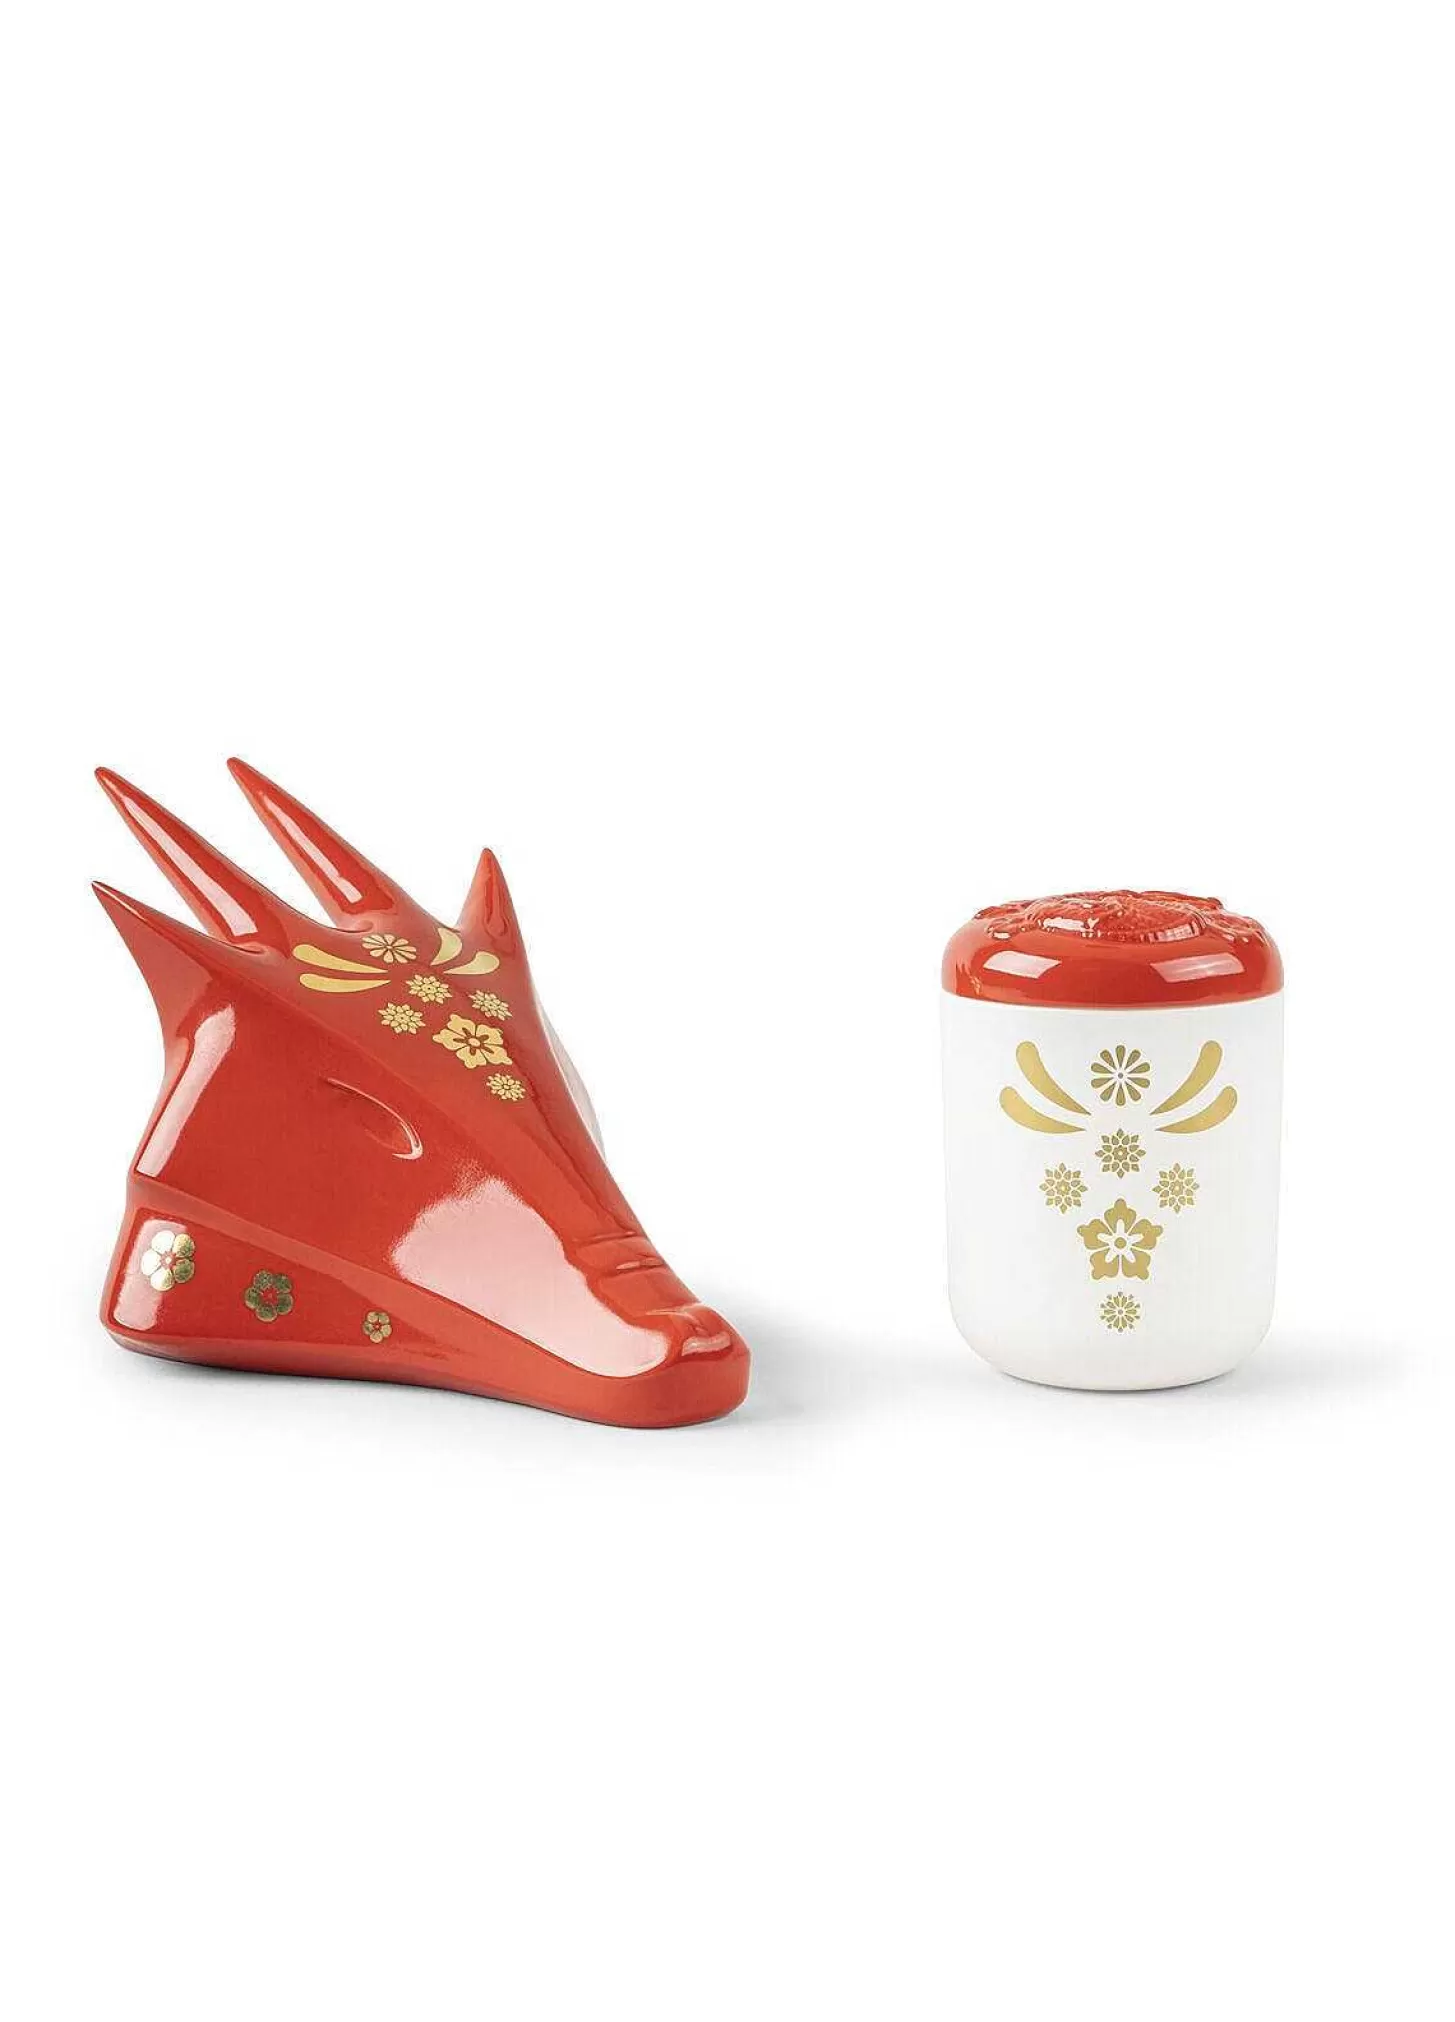 Lladró Year Of The Dragon Set. Limited Edition^ Design